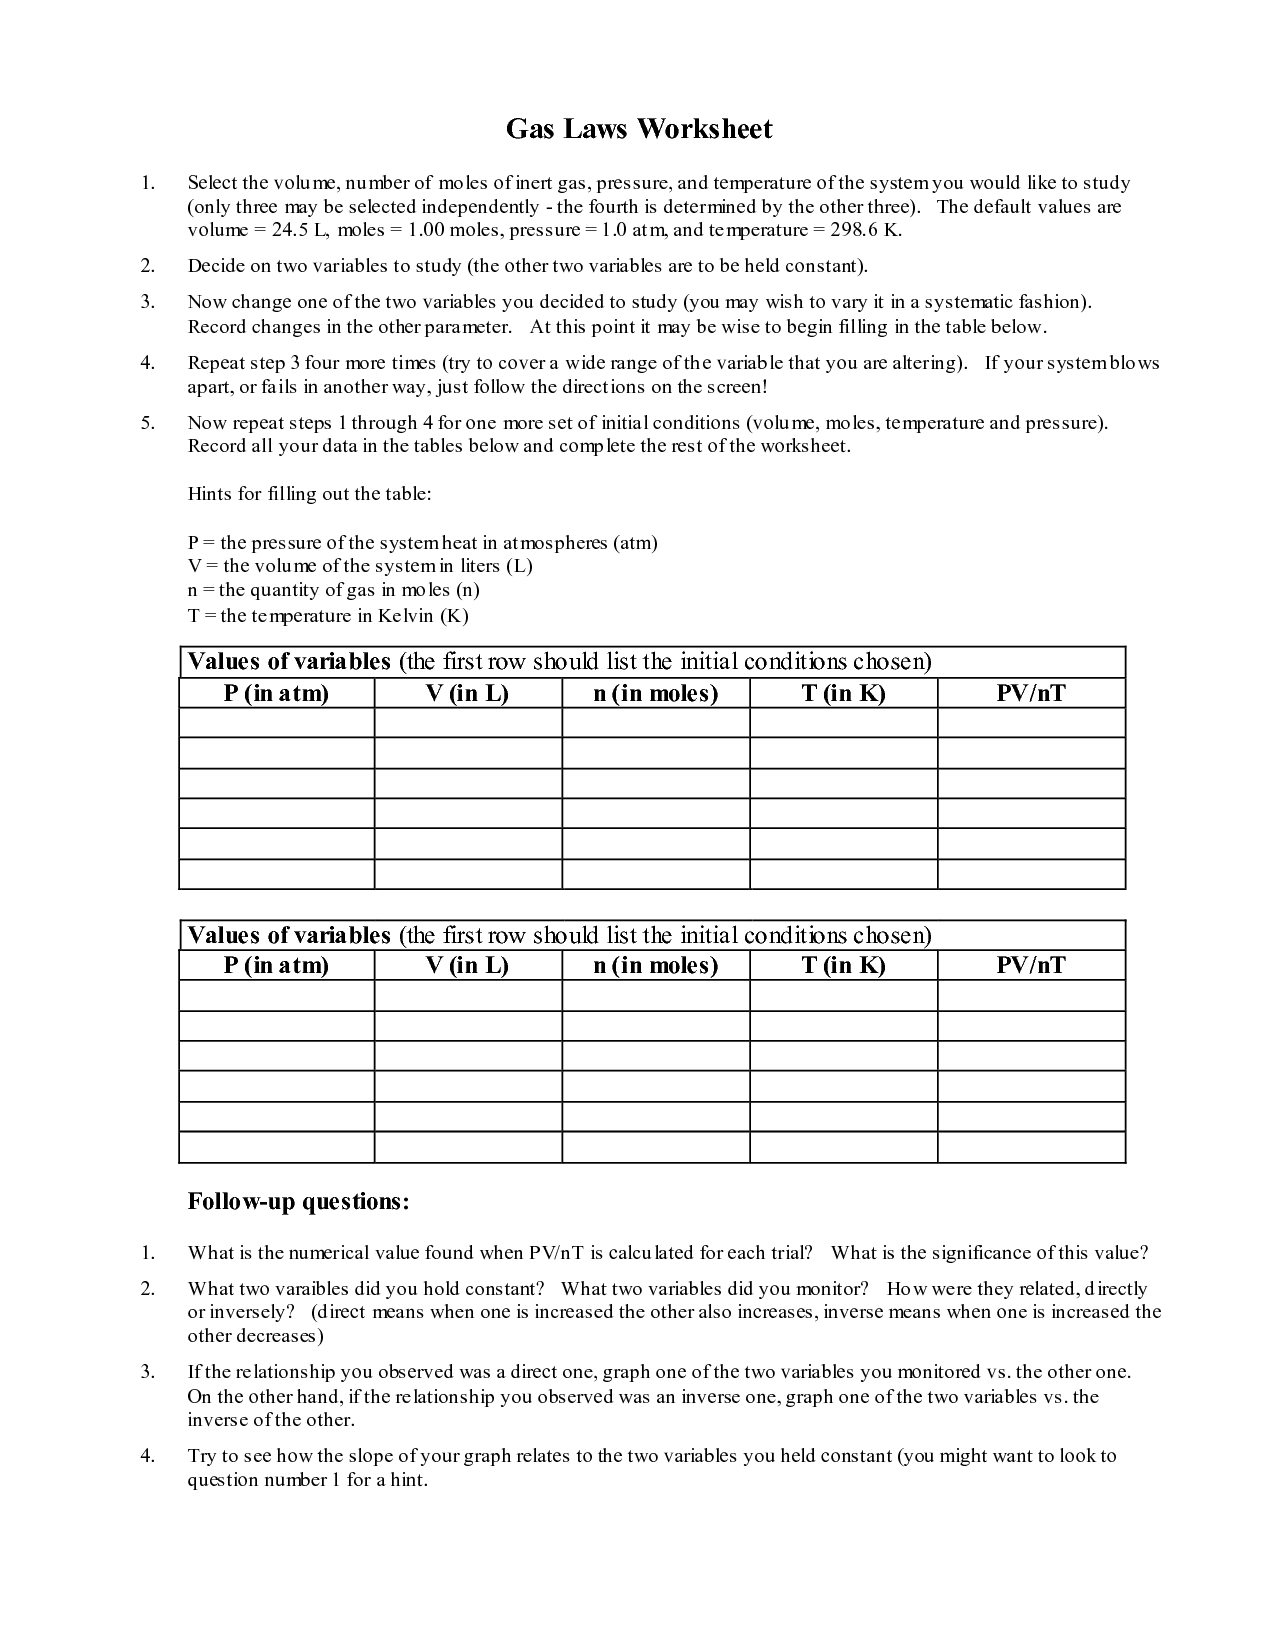 16 Best Images of Gas Law Calculations Worksheets Answers  Ideal Gas Law Worksheet Answer Key 